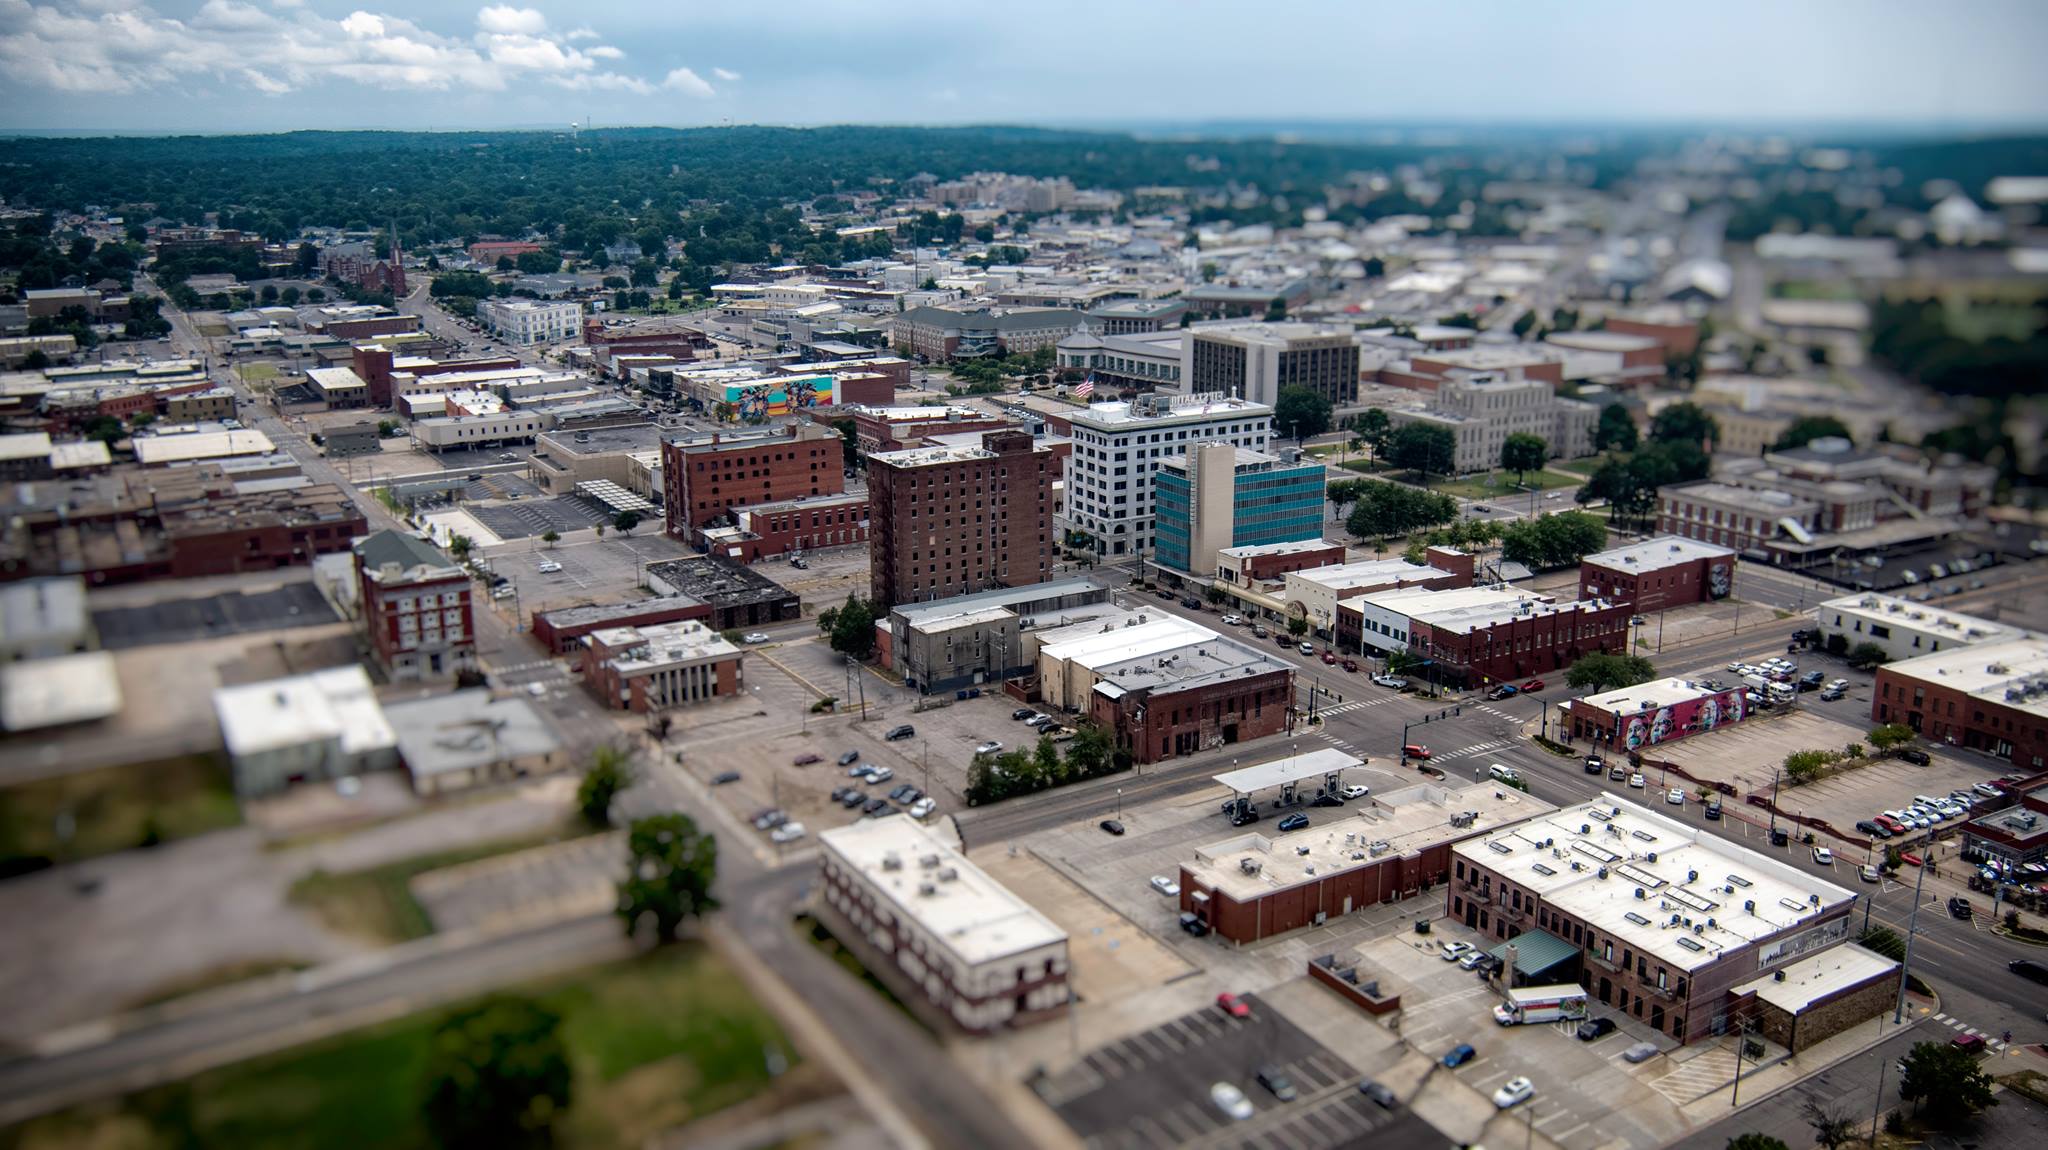 A Bird's Eye View of Fort Smith Drones Over Arkansas